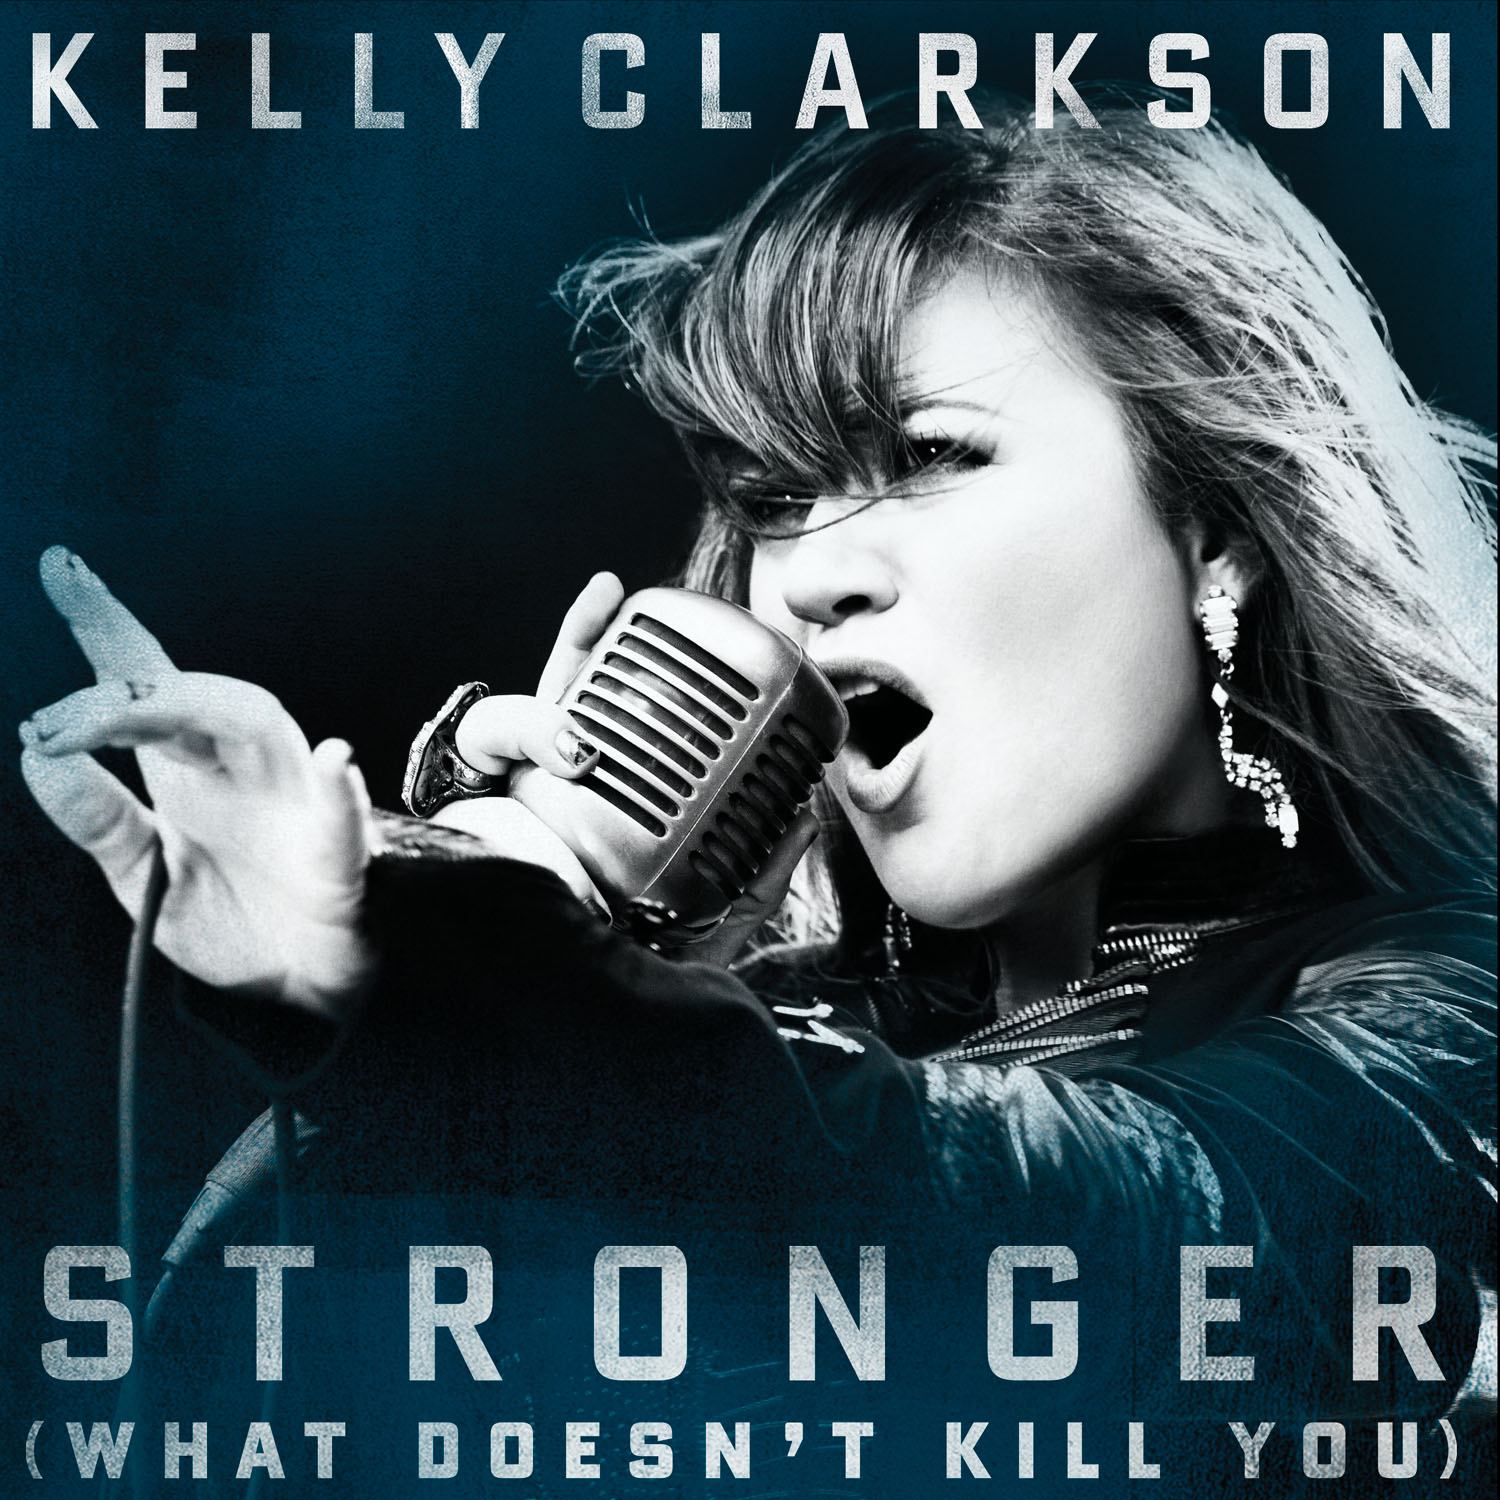 Single >> "Stronger (What Doesn't Kill You)" - Página 10 Kelly+Clarkson+-+%2528What+Doesn%2527t+Kill+You%2529+Stronger+%255B2011%255D